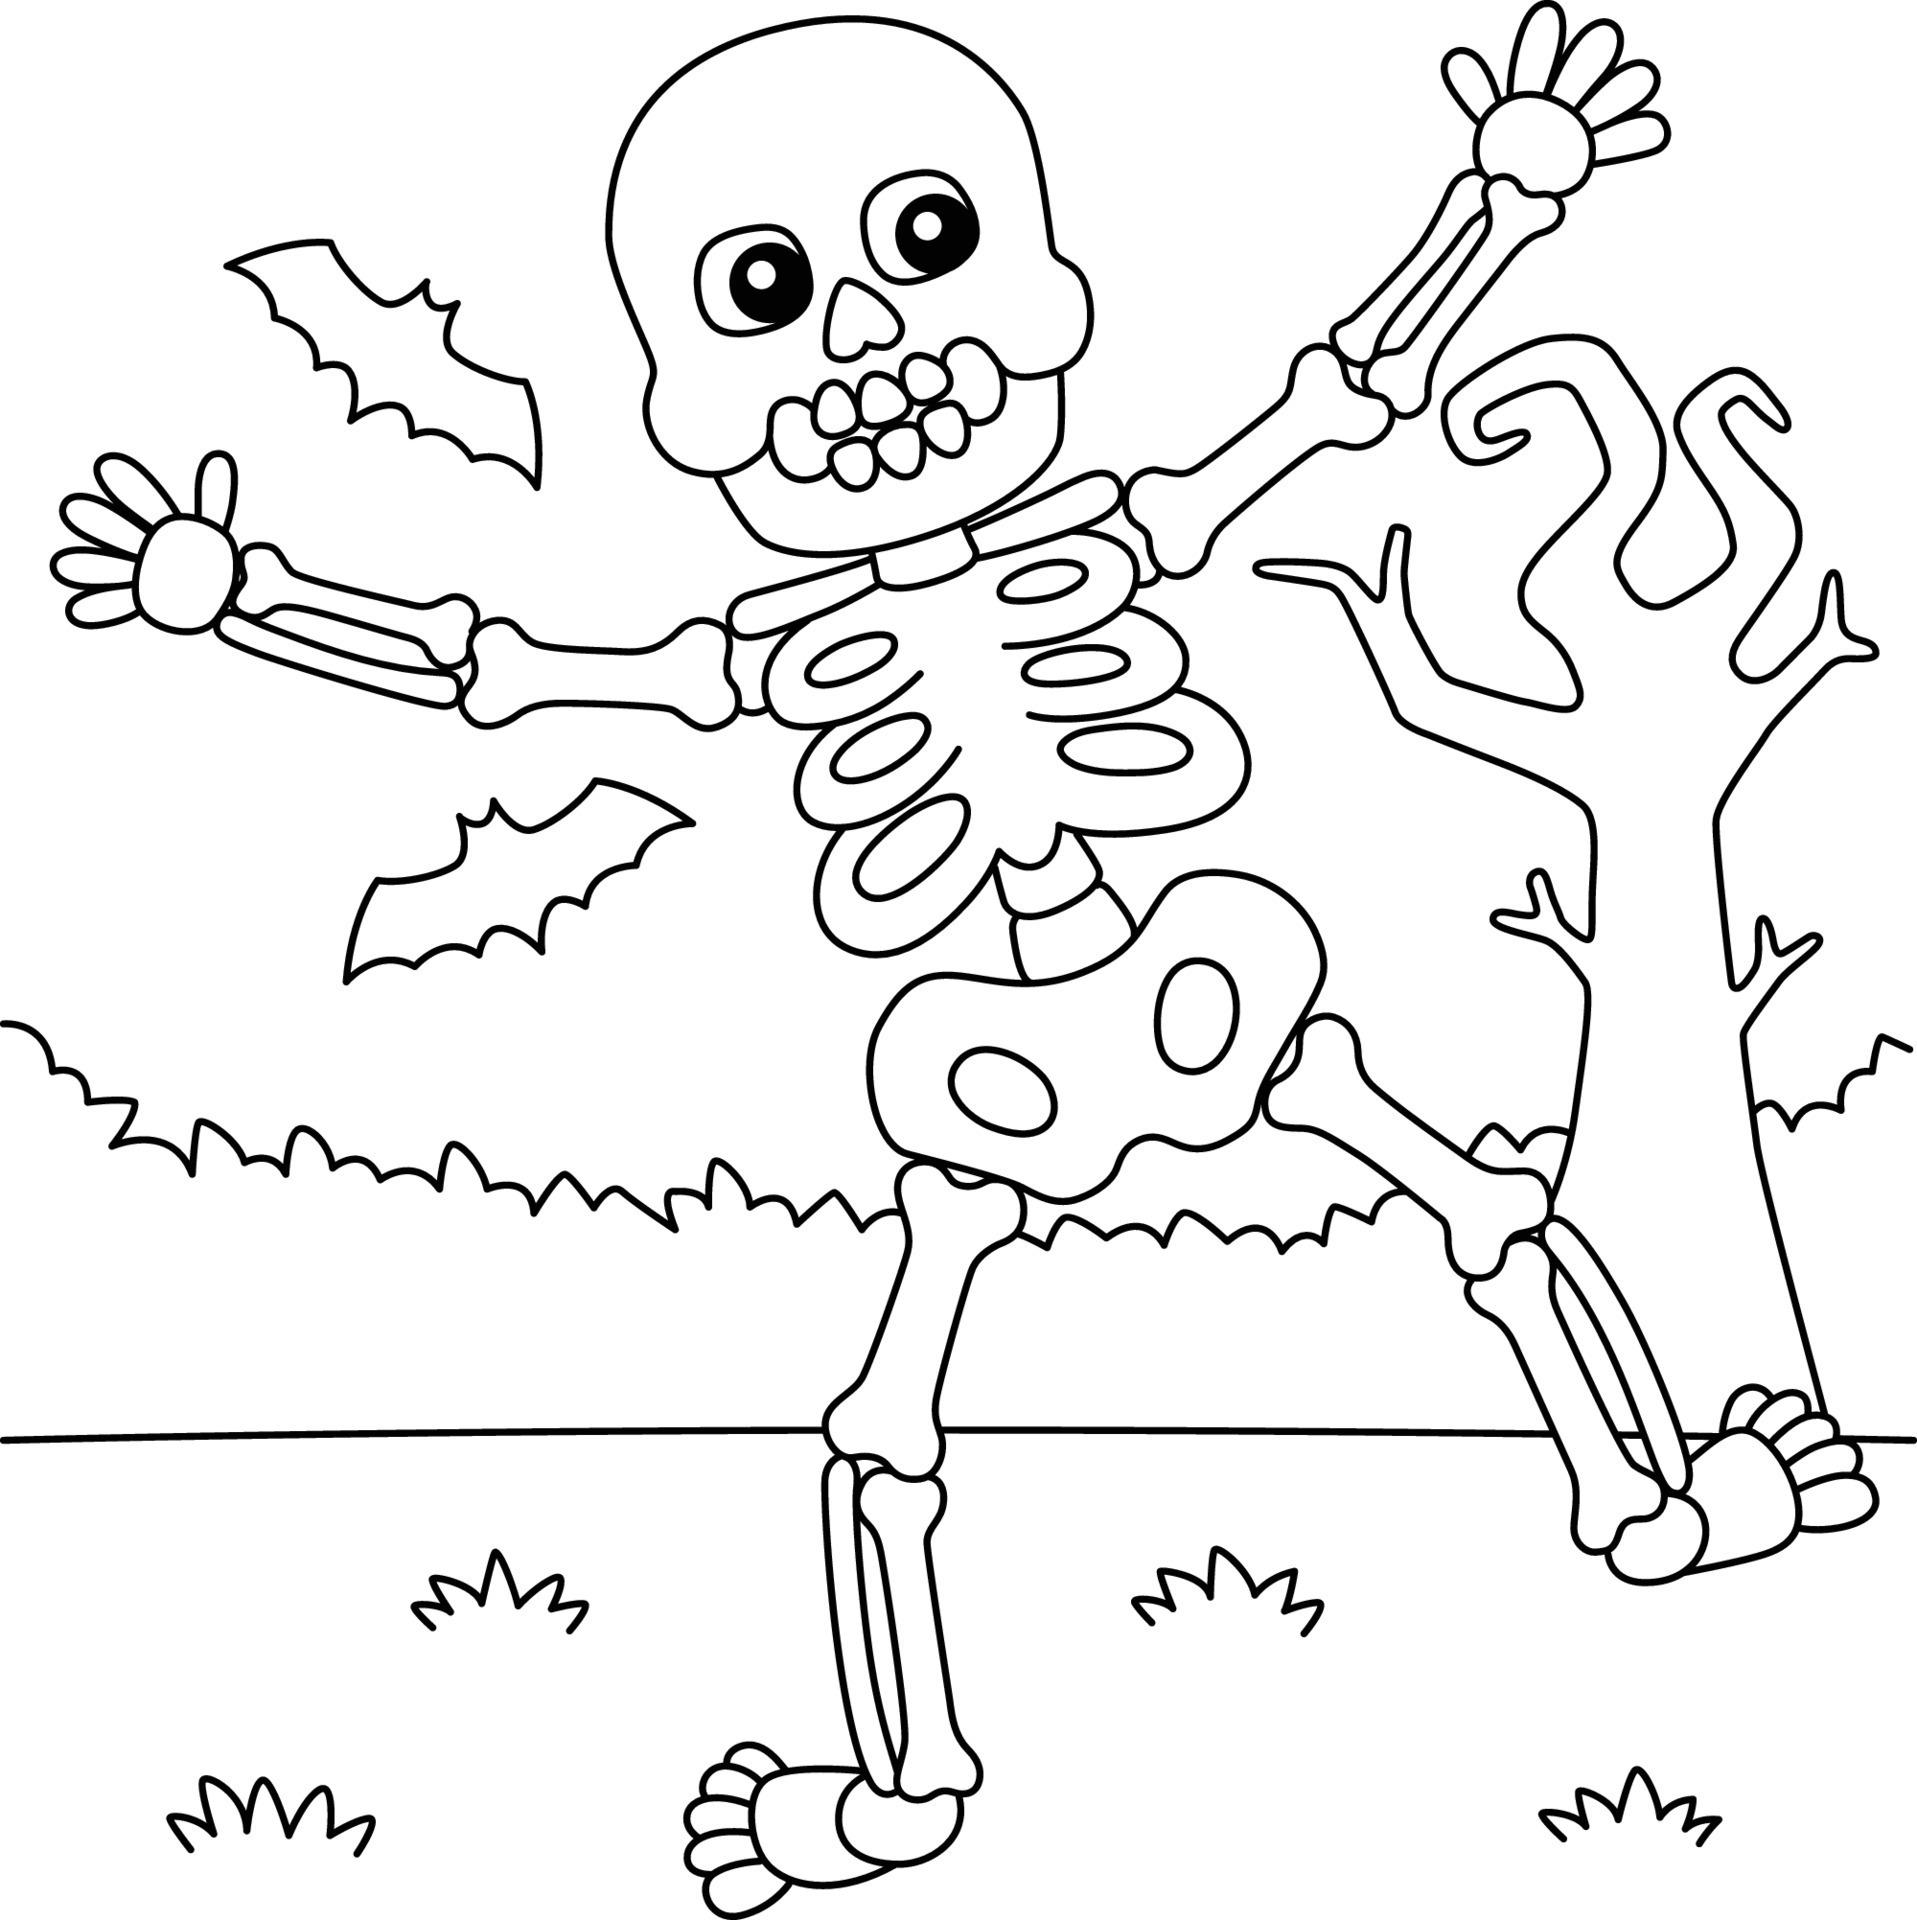 Transparent Skeleton Hand Do Not Re-post Or Remove - Hand Skeleton Drawing  Aesthetic PNG Image | Transparent PNG Free Download on SeekPNG